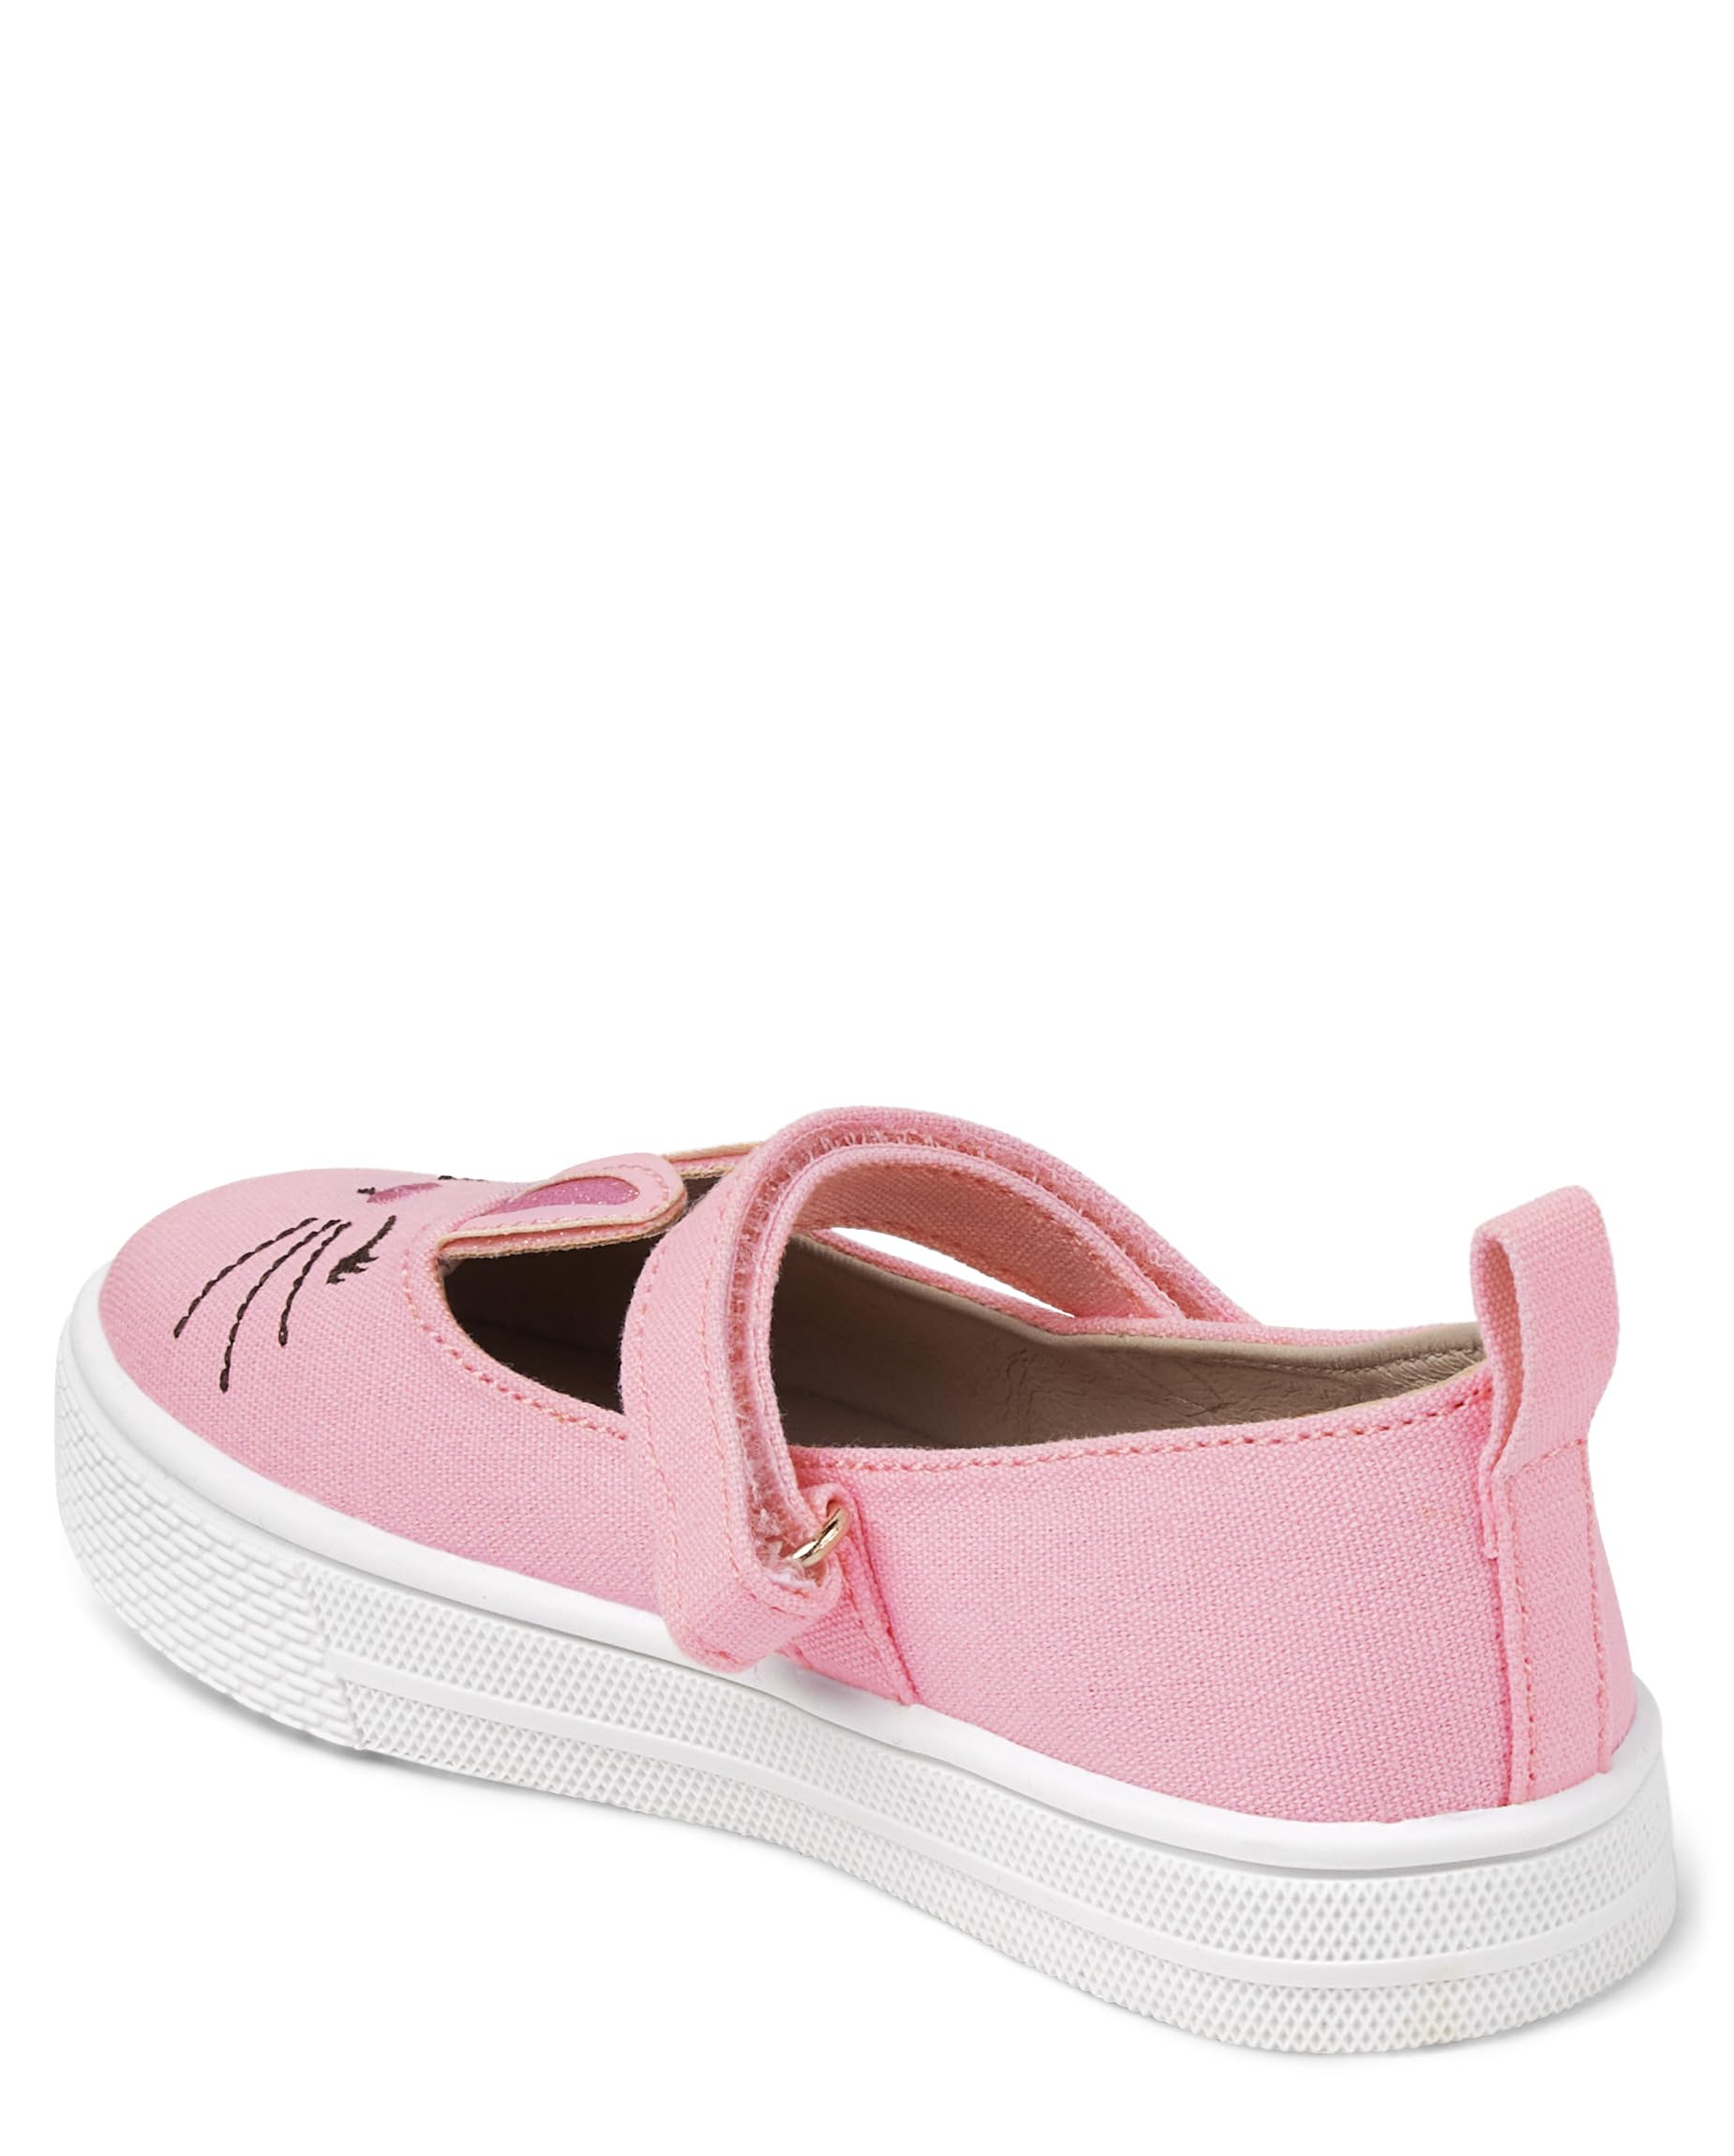 Gymboree Girl's and Toddler Slip on Casual Shoe Penny Loafer